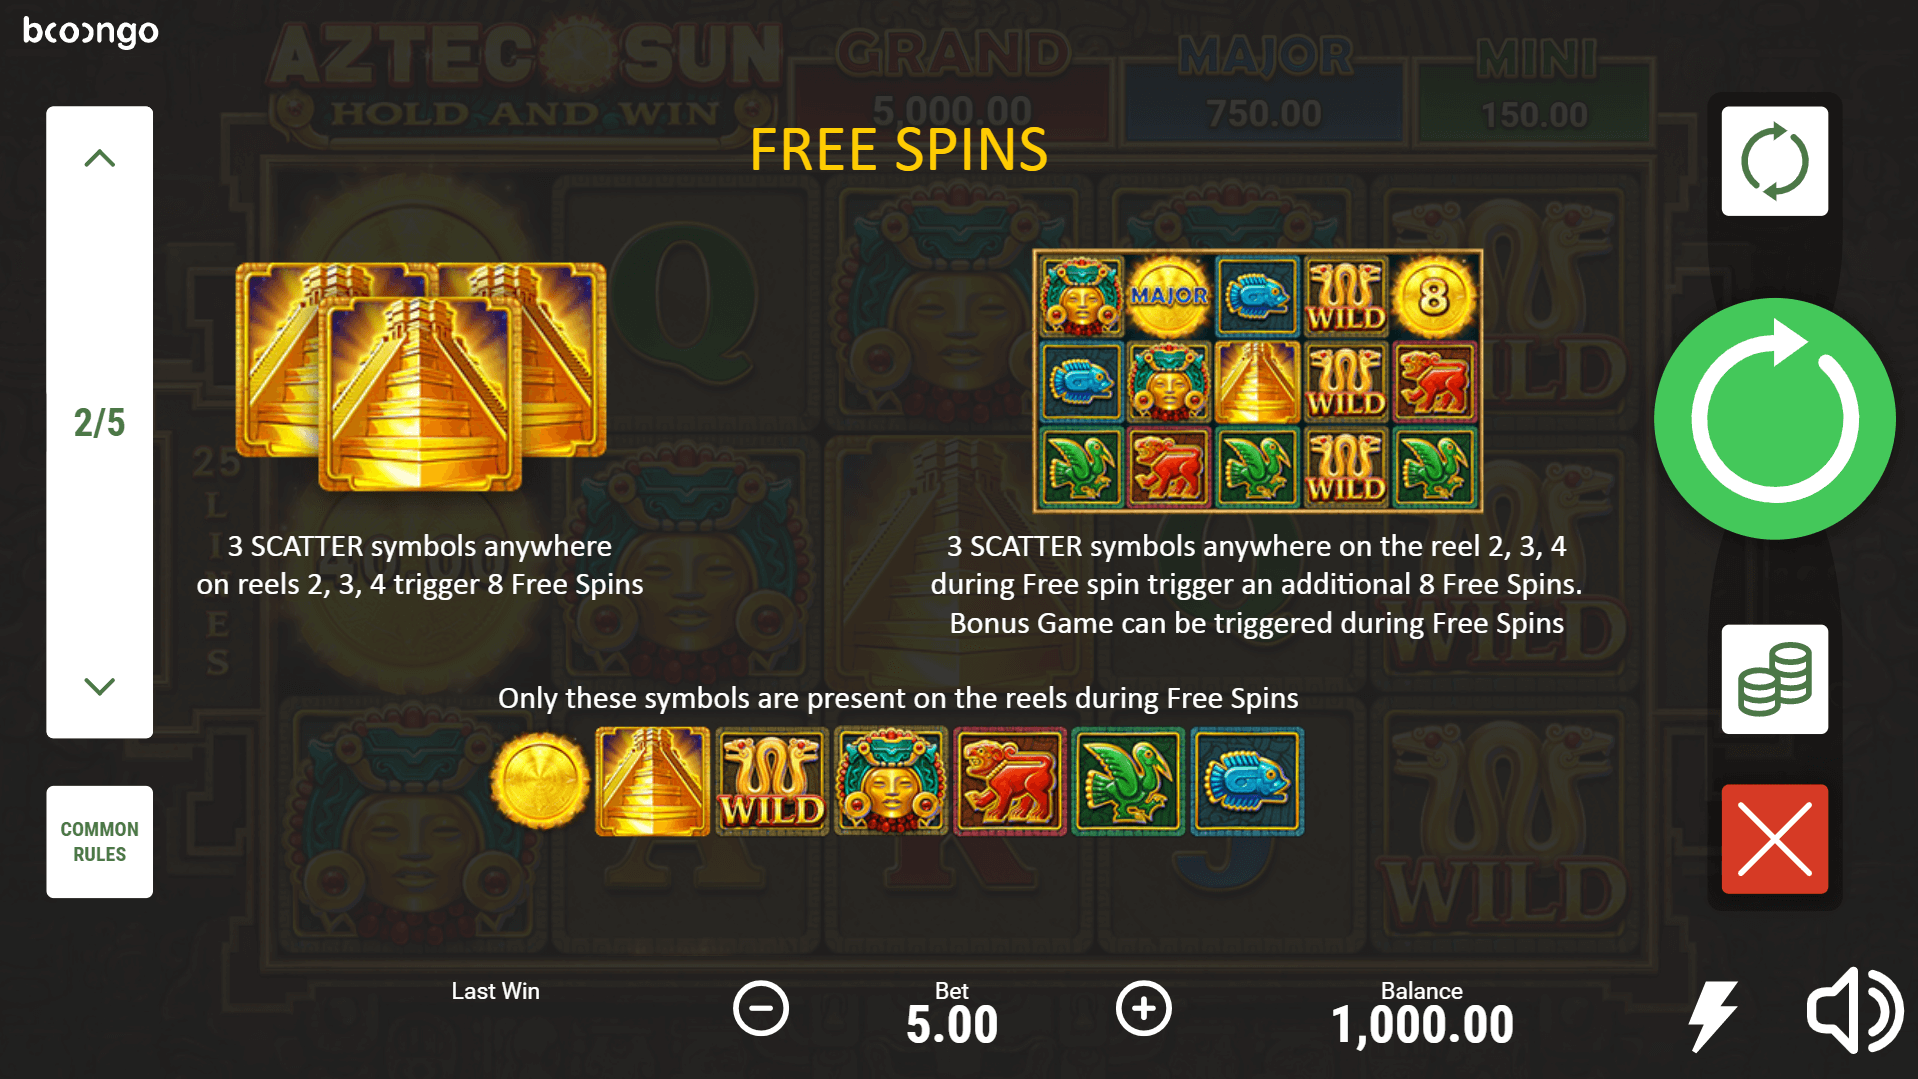 aztec sun hold and win slot machine detail image 1